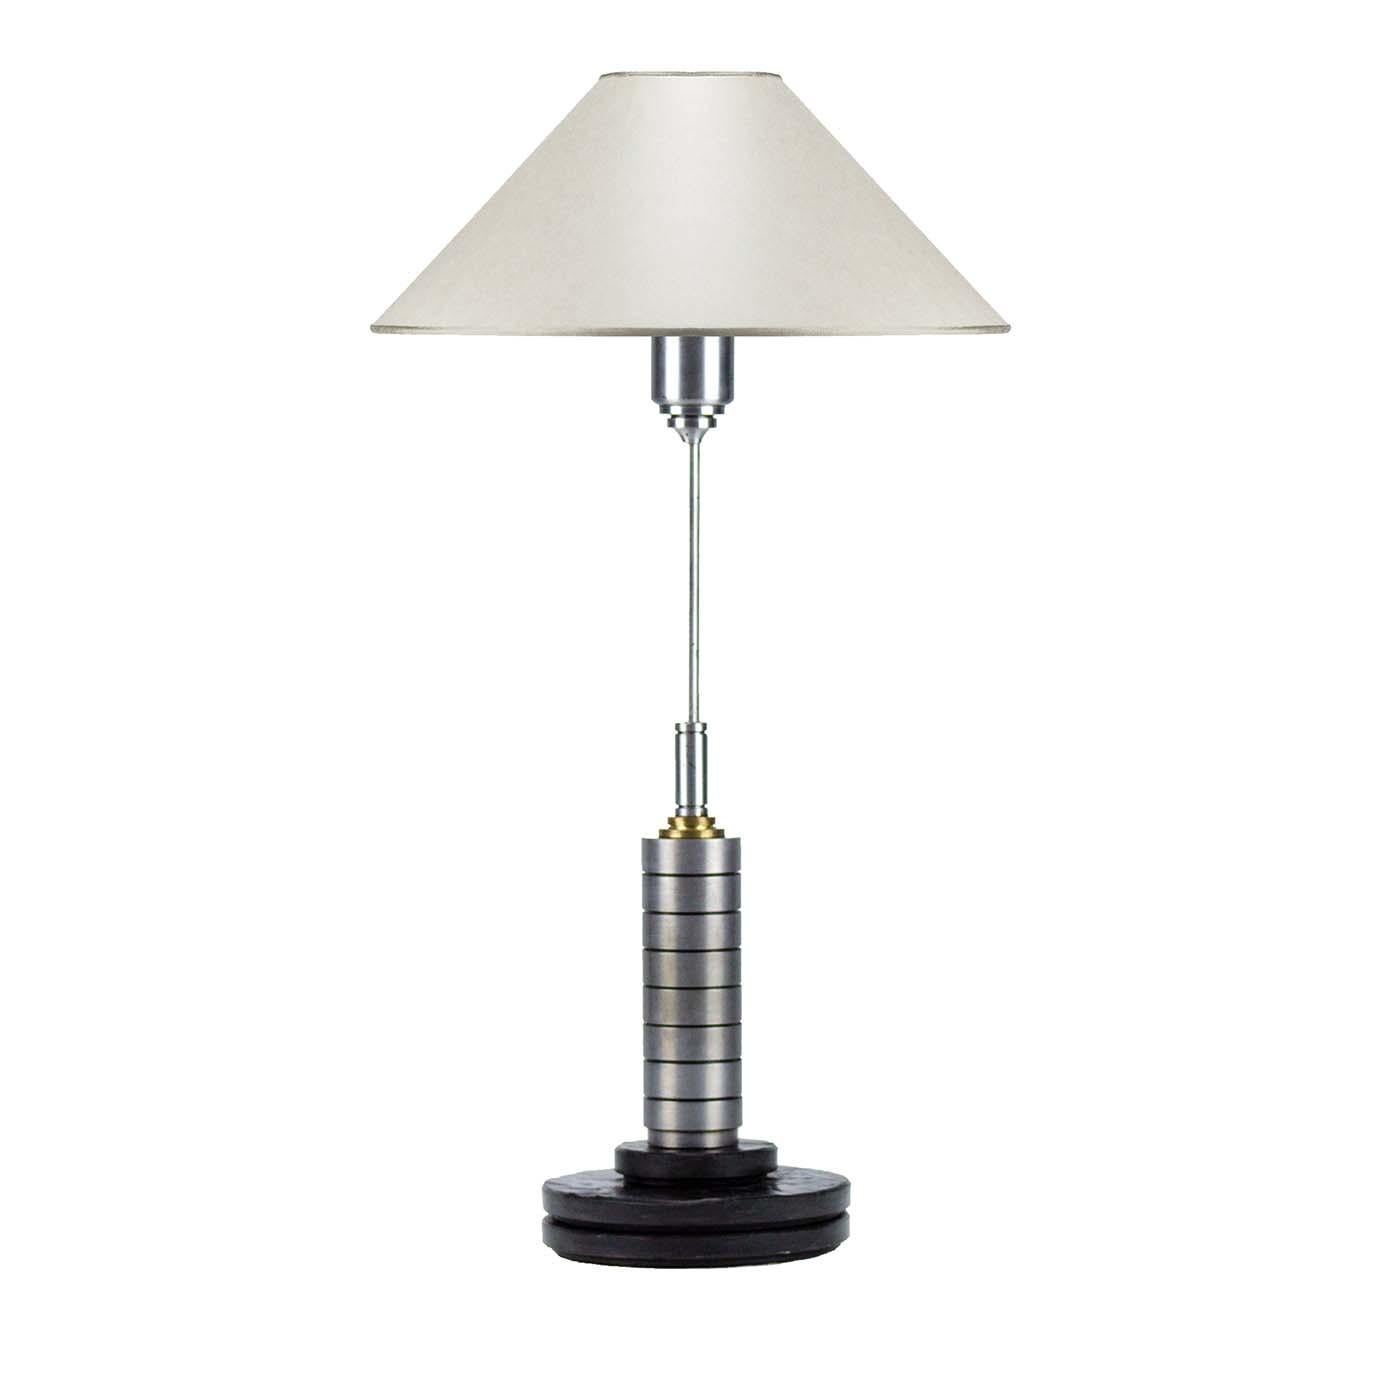 Sporting a slender structure handcrafted of steel, the stem of this superb abat-jour has a cylindrical element with a brass-colored accent on top and a striking lampshade holder with concentric rings that support the white pagoda parchment shade.